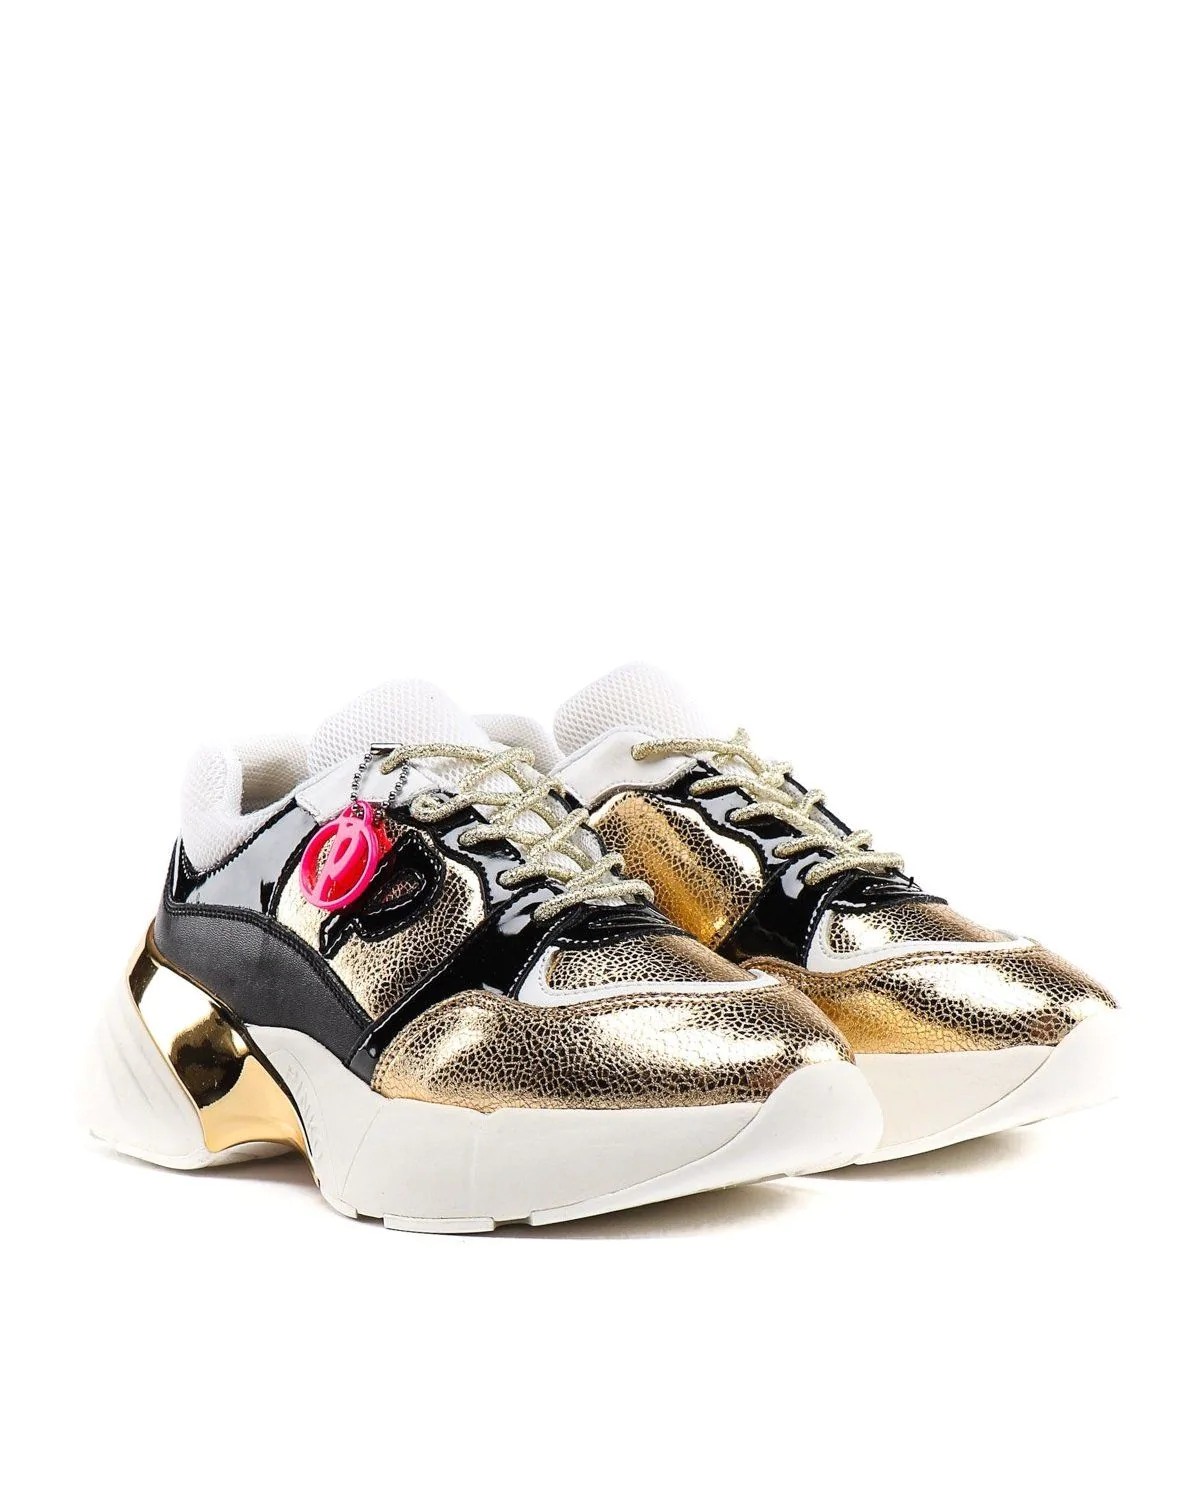 Pinko Metallic Olivo Shoes To Rock Black And Gold Sneakers